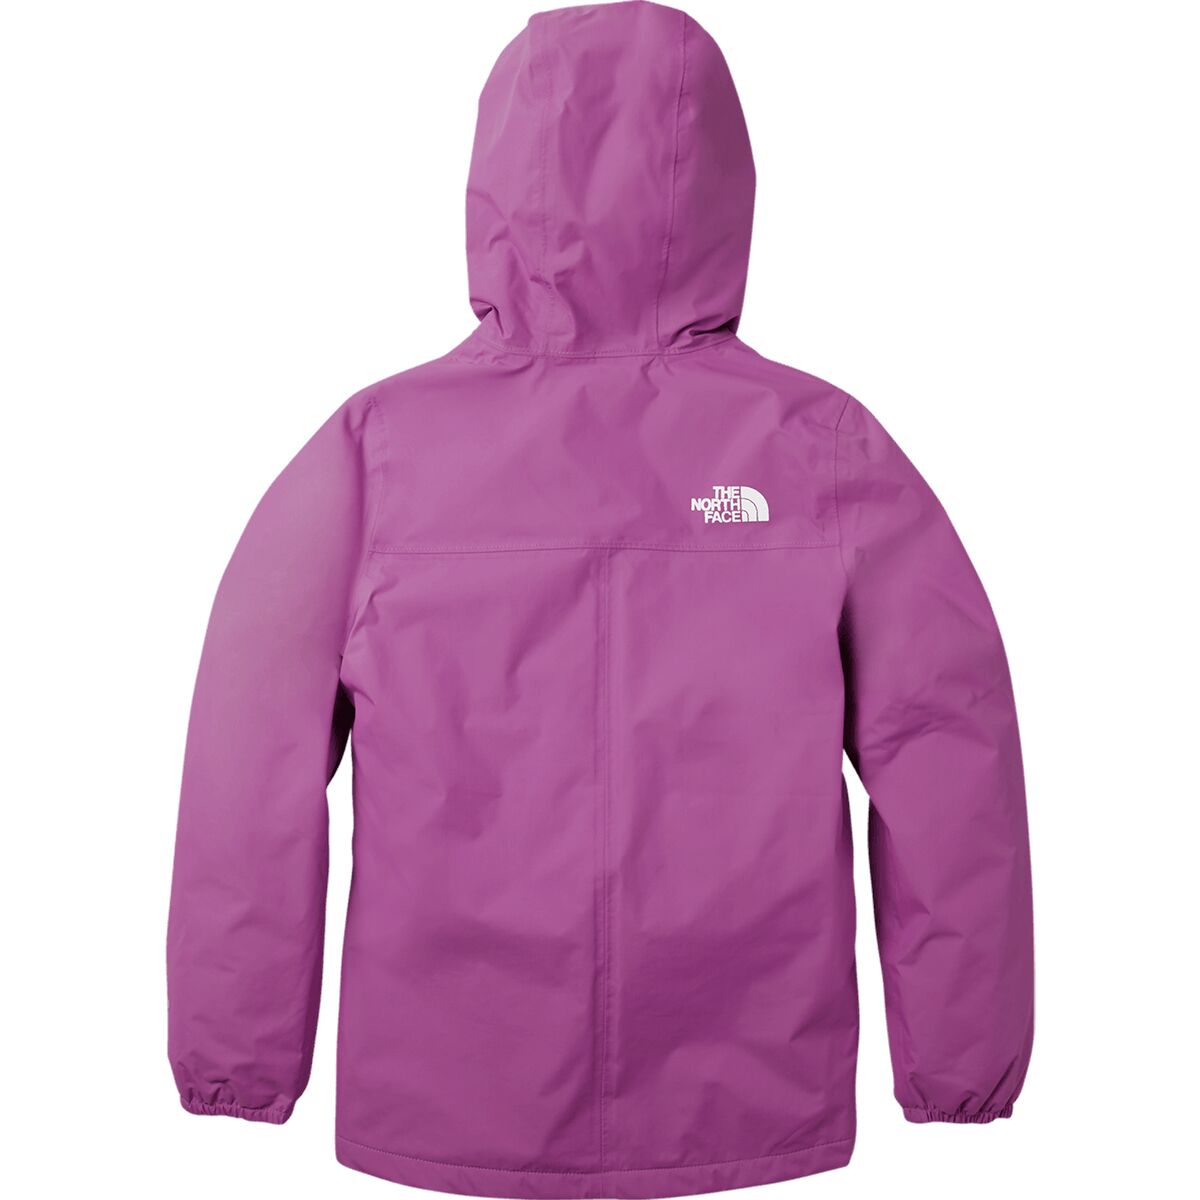 The North Face Warm Storm Hooded Jacket - Girls' - Kids